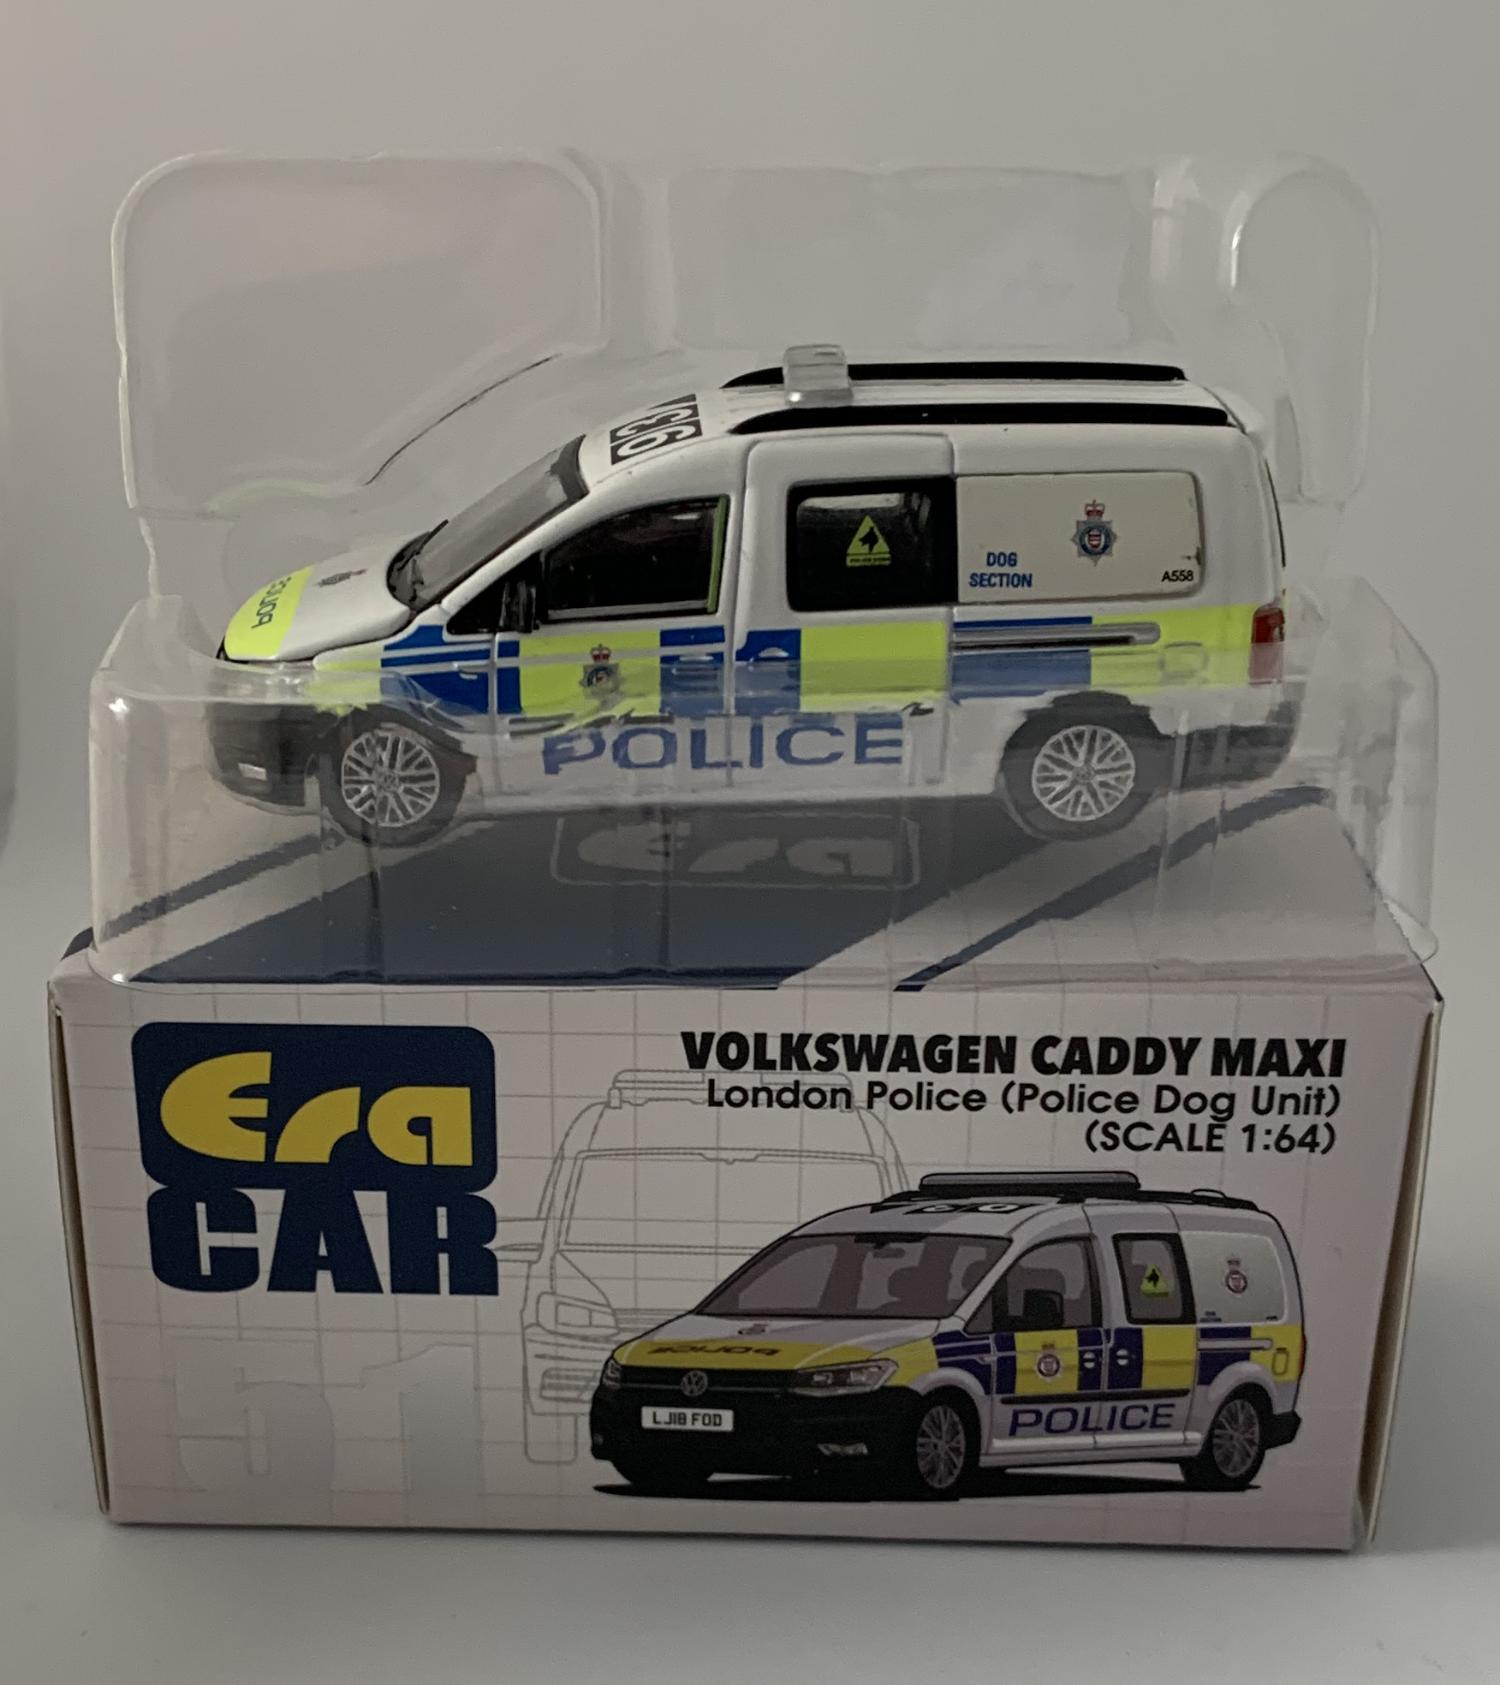 An excellent scale model of a VW Caddy Police Dog Unit decorated in authentic London Police livery, authentic graphics